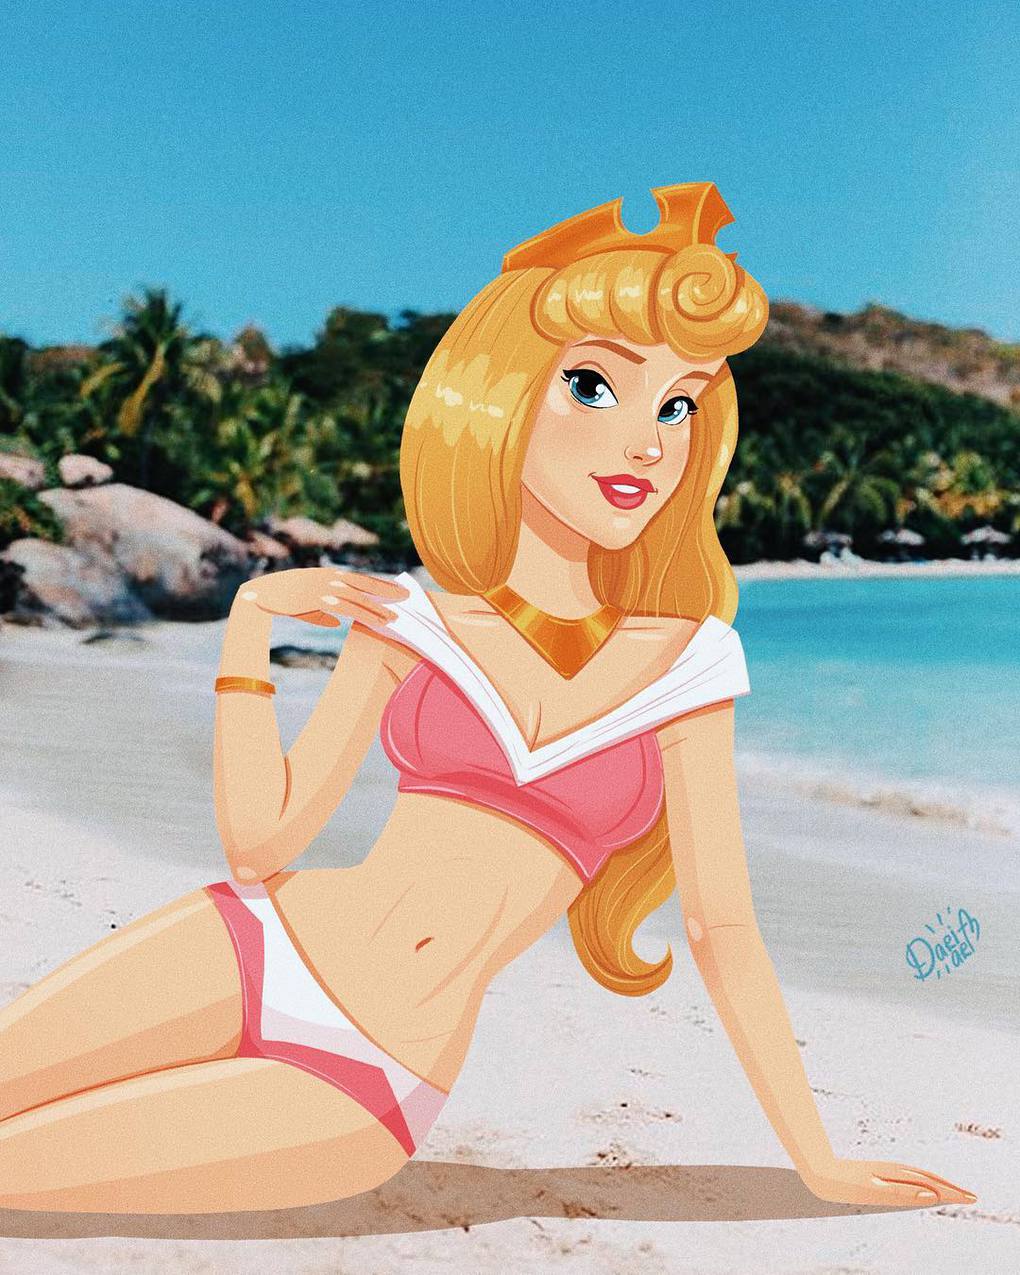 Disney Princess in swimsuits with real - YouLoveIt.com